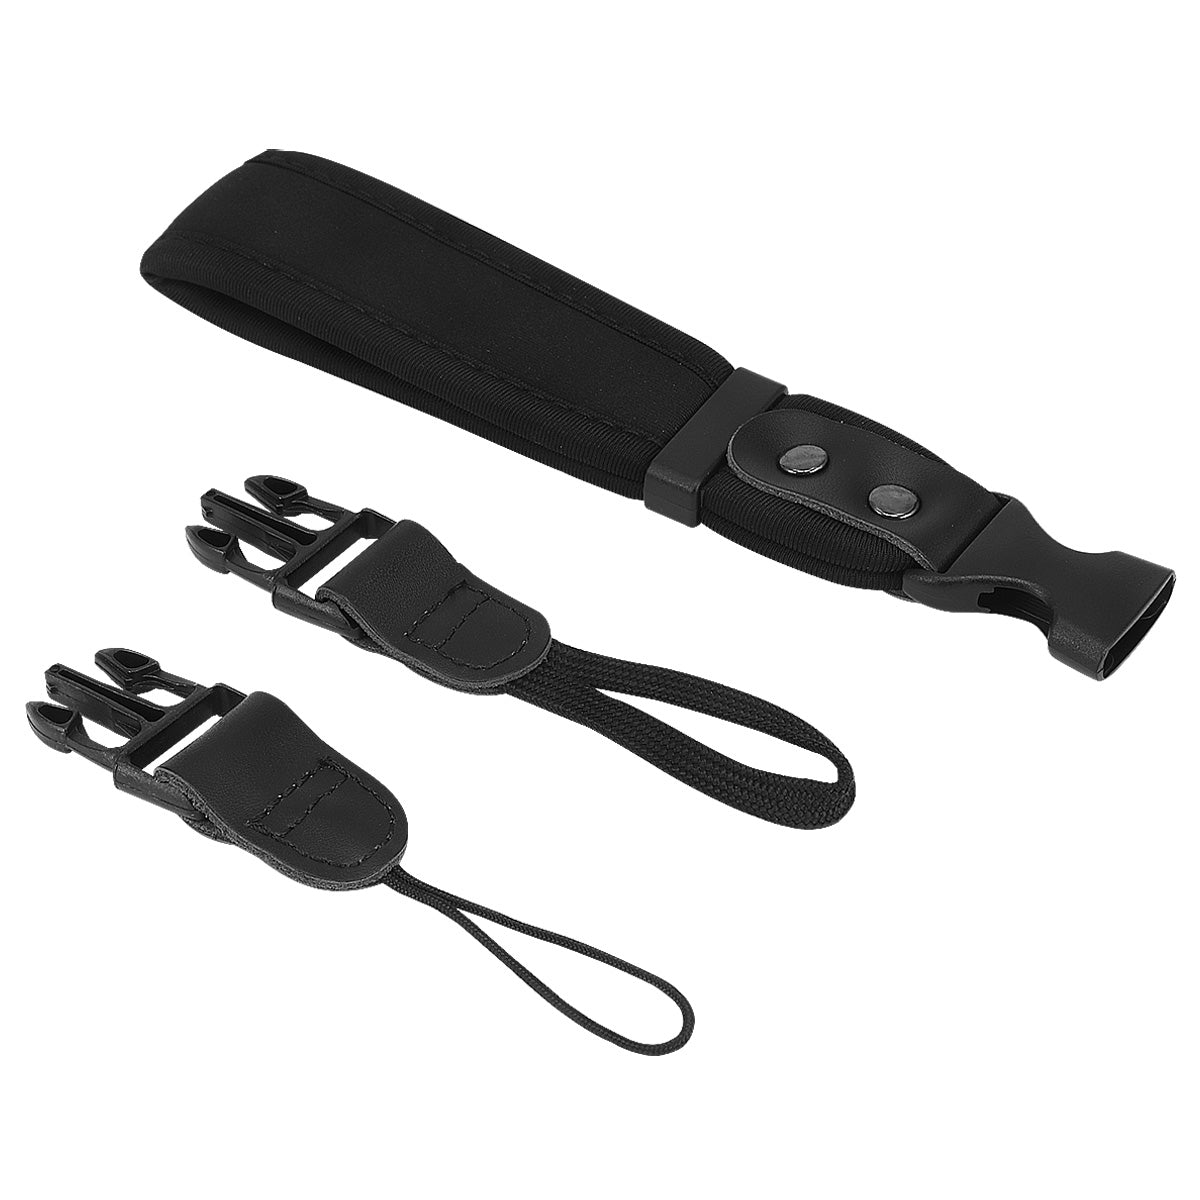 Haoge Camera Hand Wrist Strap with 2 Connections for Canon Nikon Sony Fujifilm Panasonic Ricoh DSLR SLR Mirrorless Point & Shoot Cameras